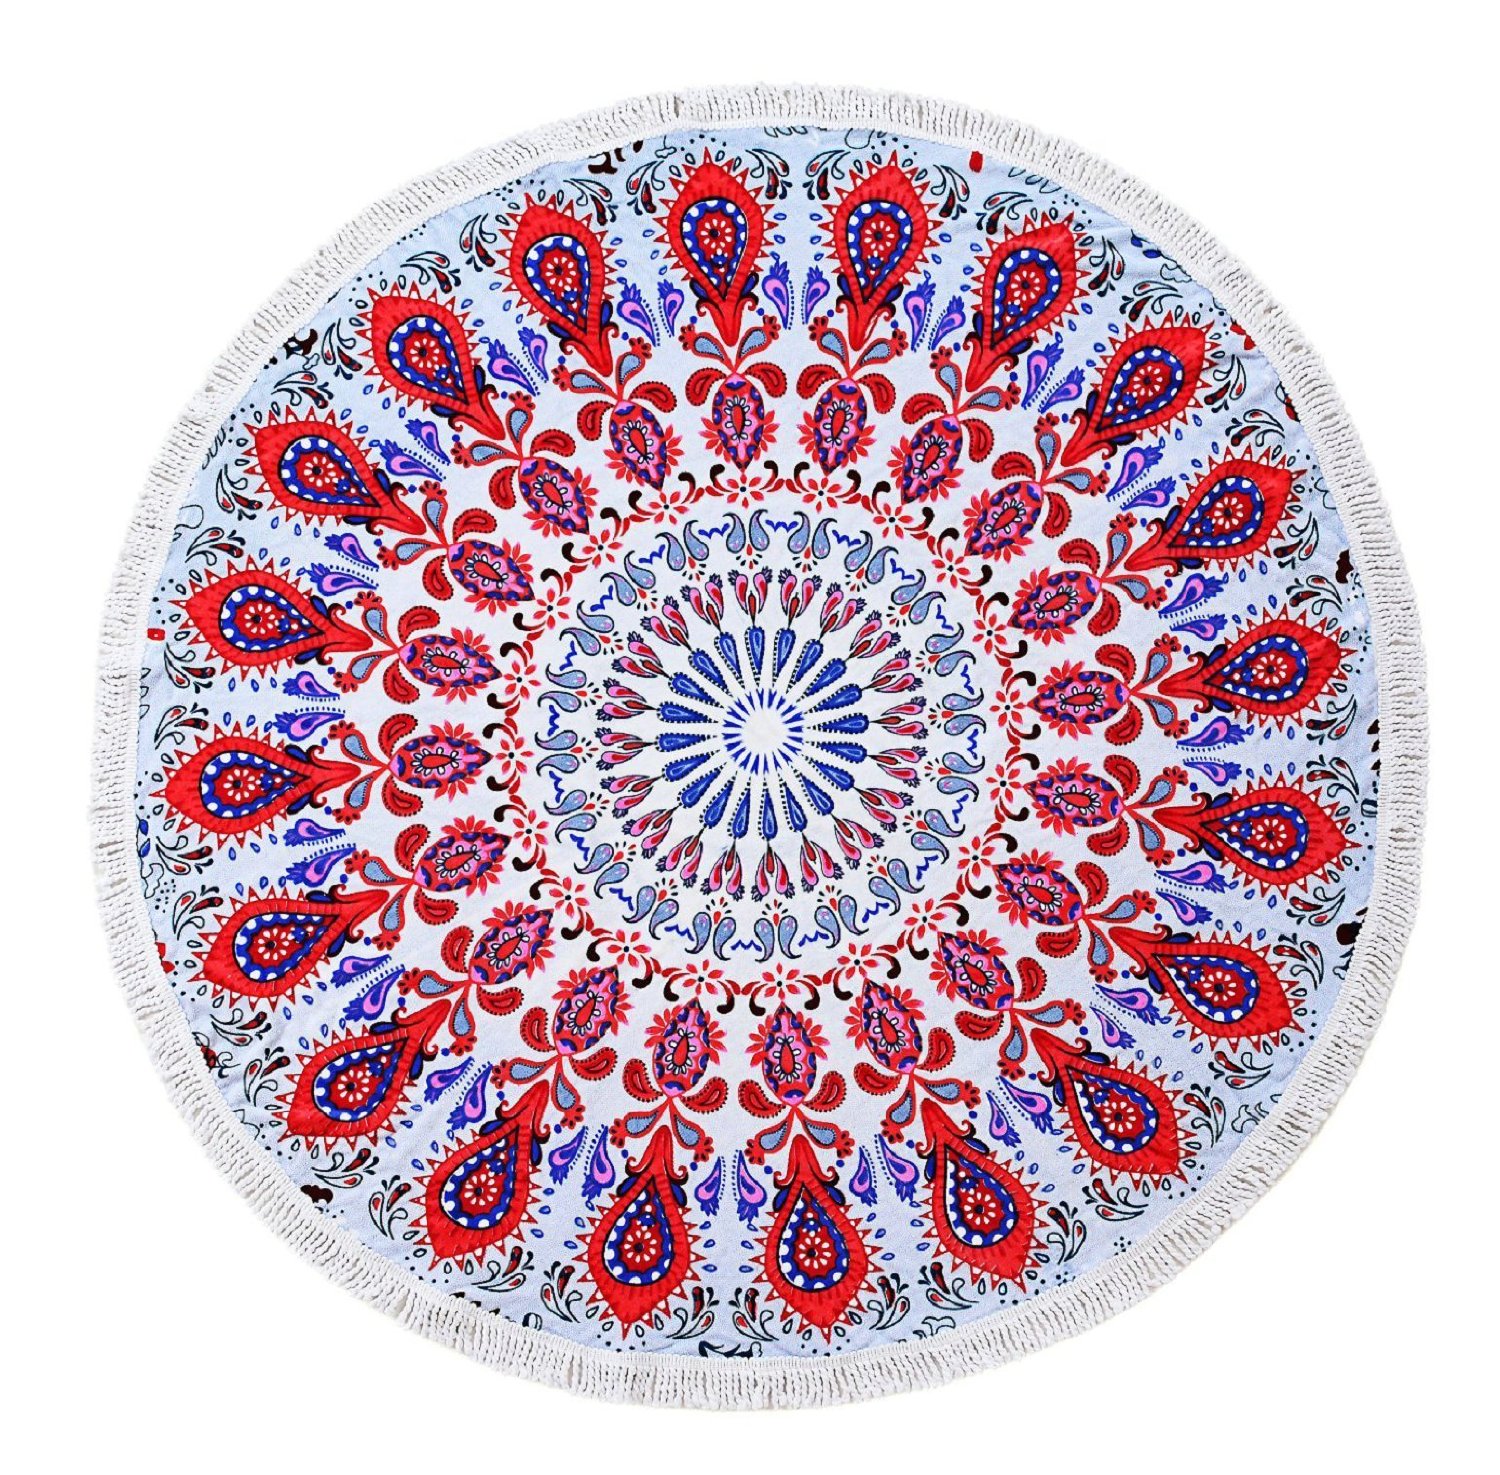 150cm-Pure-Cotton-Cut-Pile-Printing-Round-Beach-Towel-Yoga-Mat-Bed-Sheet-Tapestry-Tablecloth-1073160-7